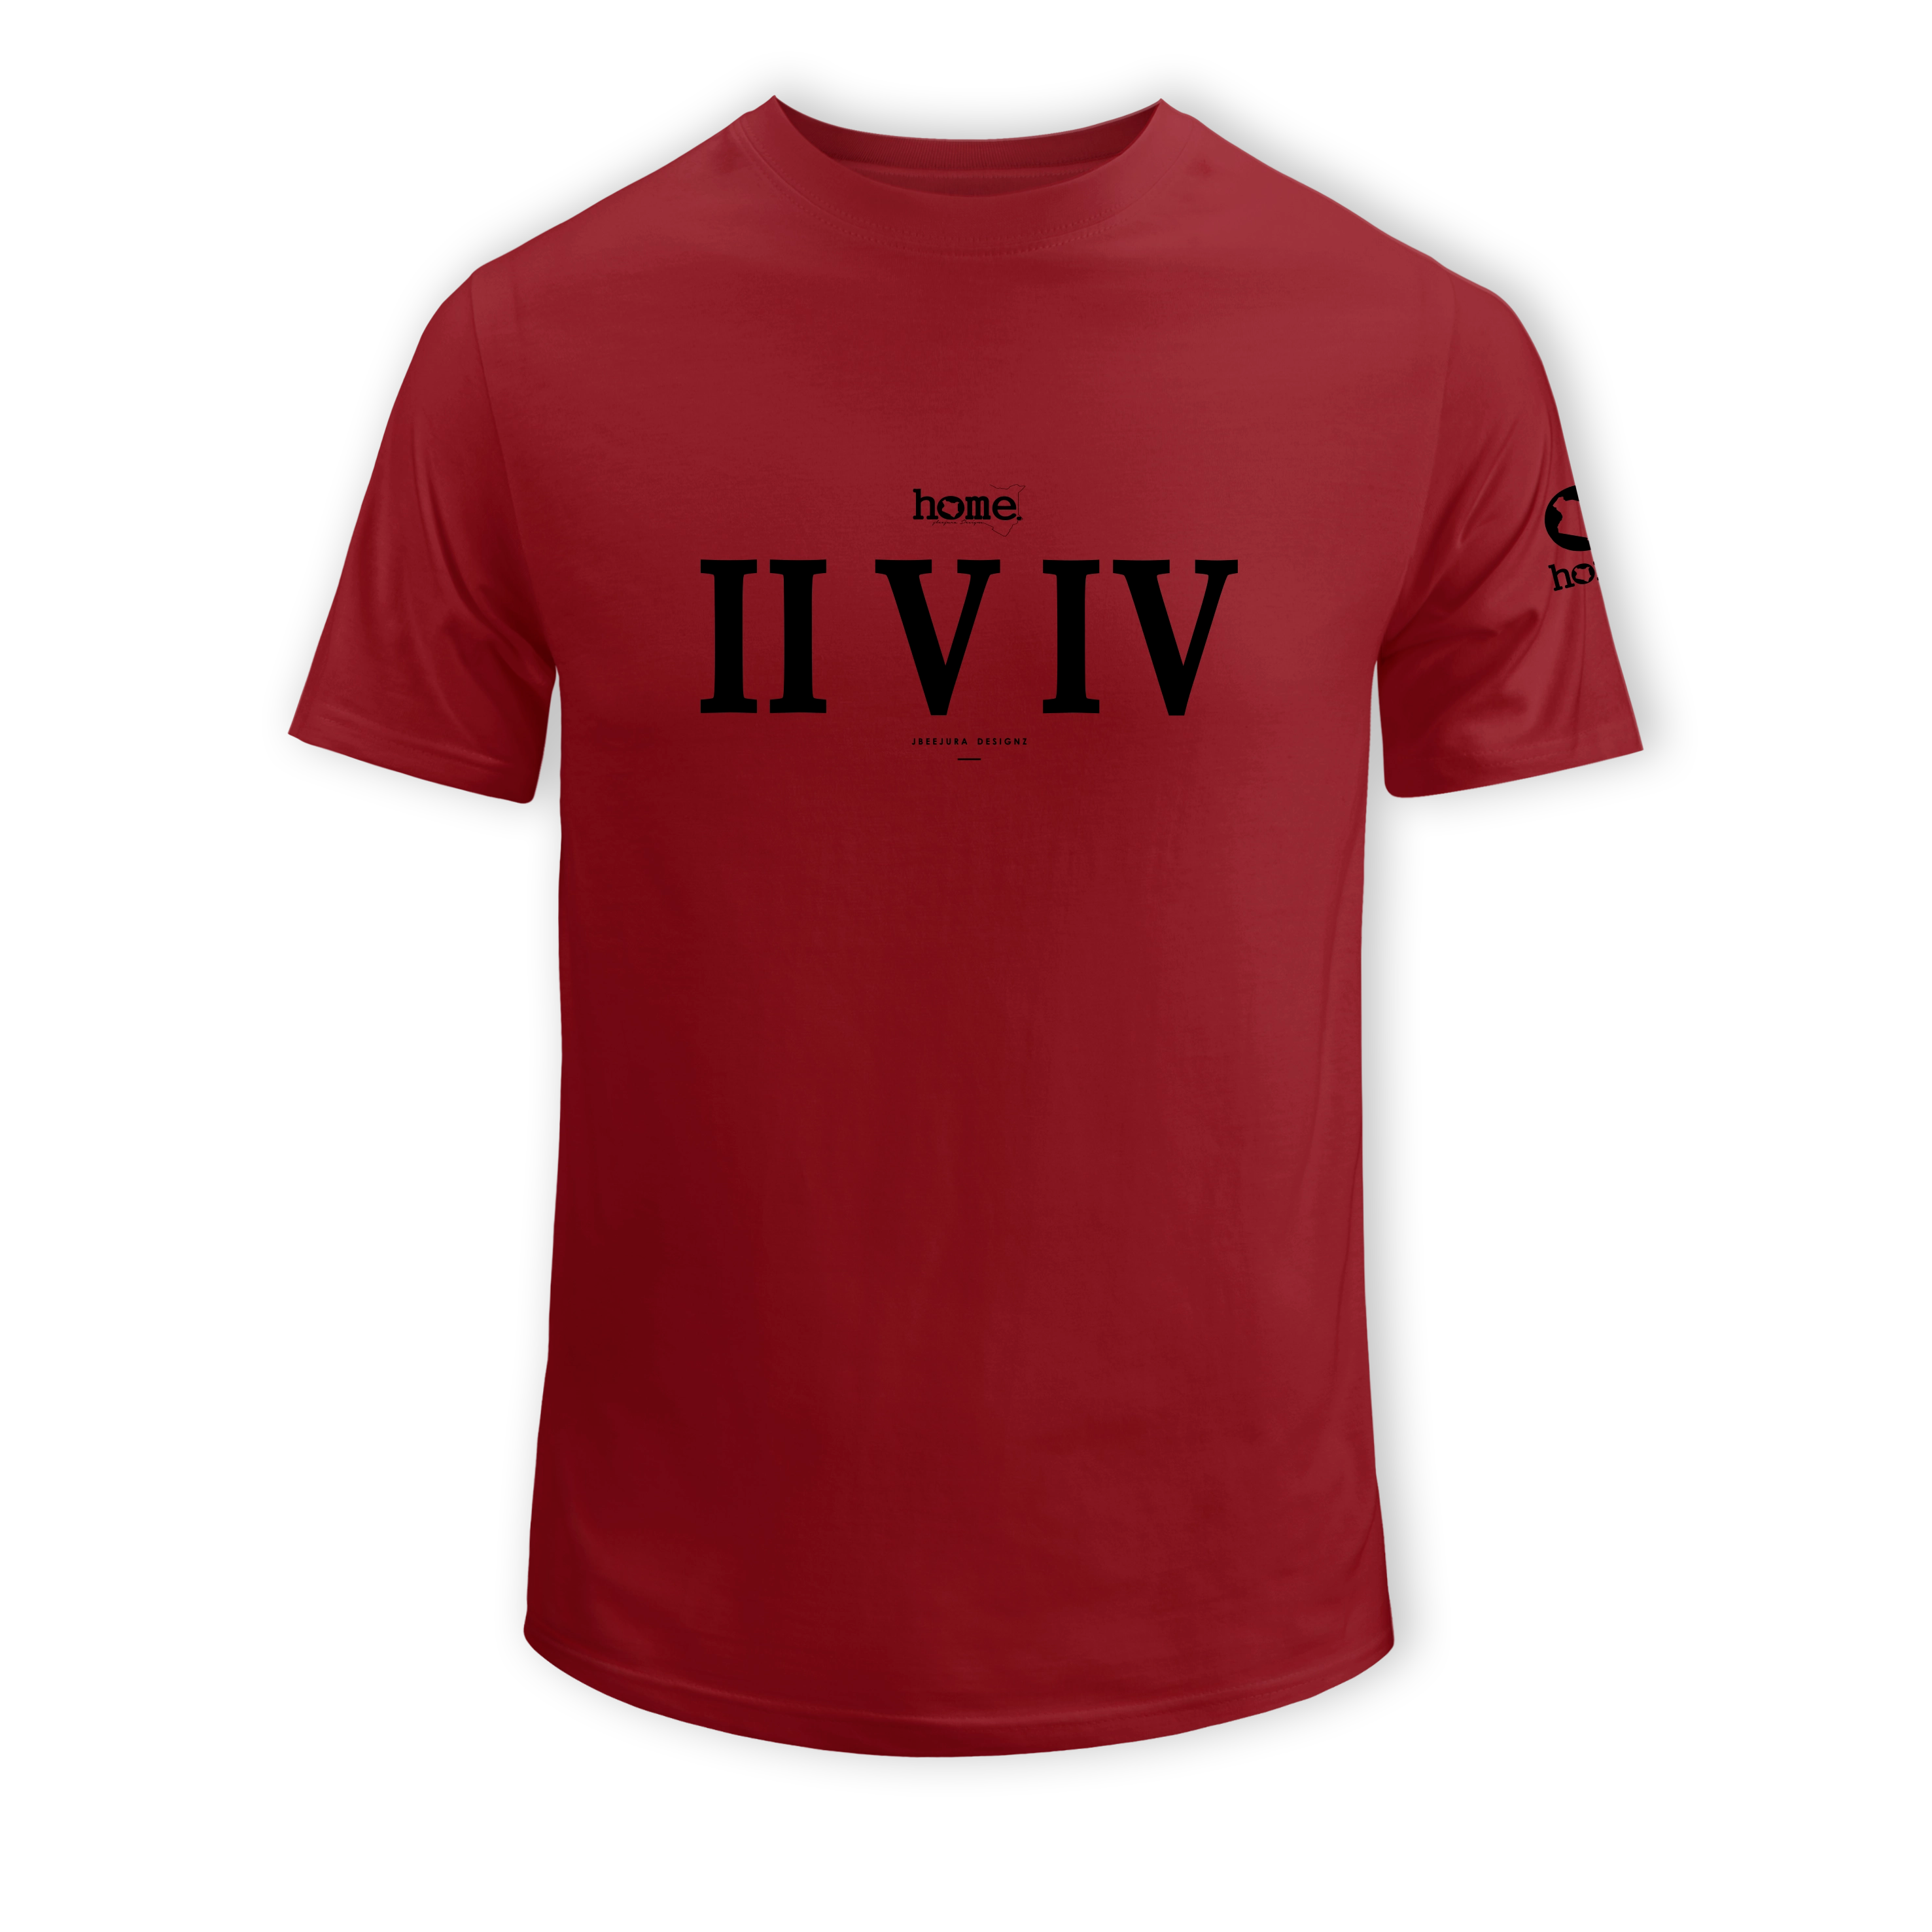 home_254 SHORT-SLEEVED MAROON RED T-SHIRT WITH A BLACK ROMAN NUMERALS PRINT – COTTON PLUS FABRIC